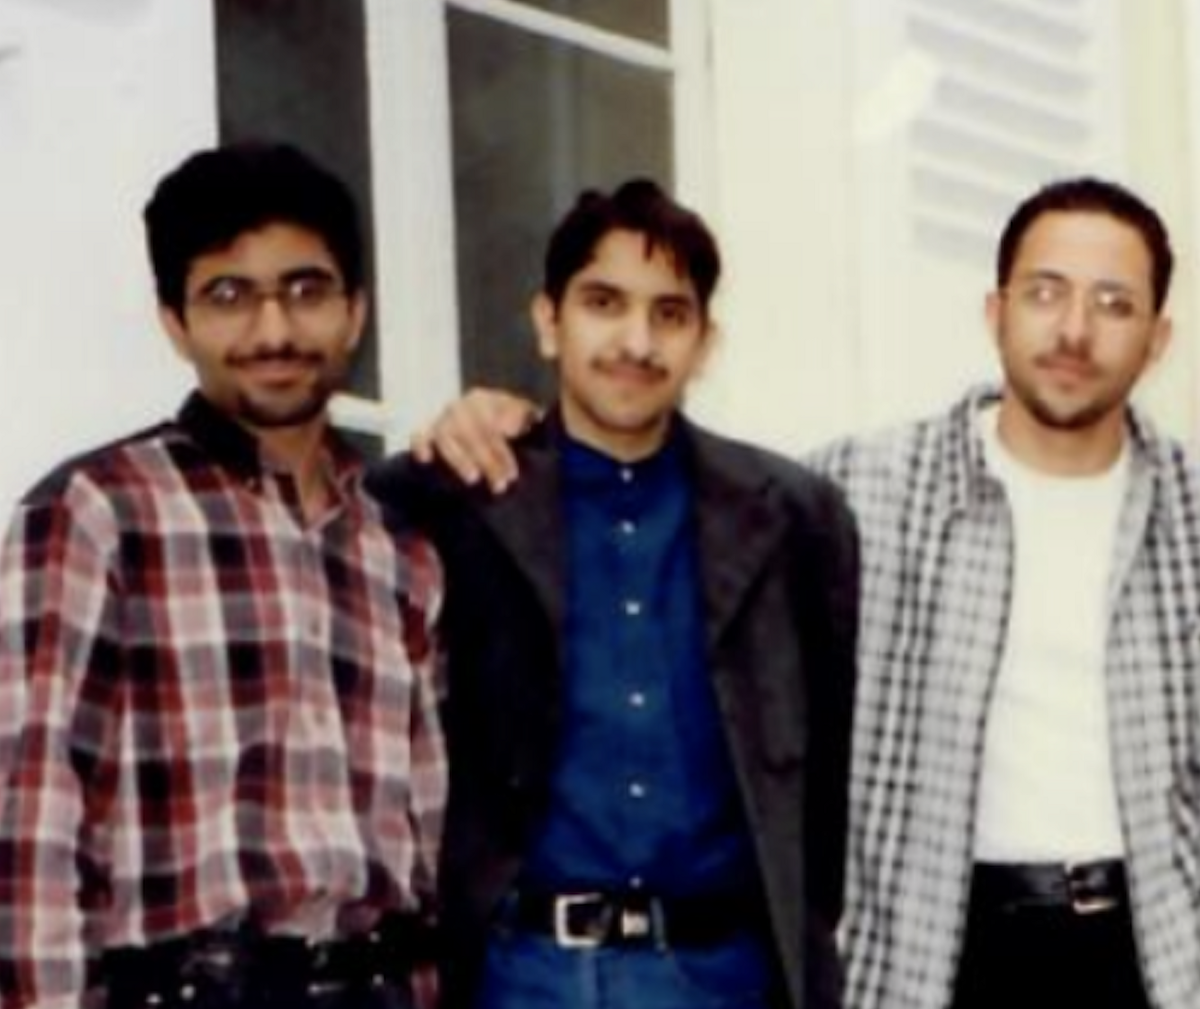 From left to right, Fahad, the author and Thamer in Paris circa mid 1990s. Image source: Rania Chahine